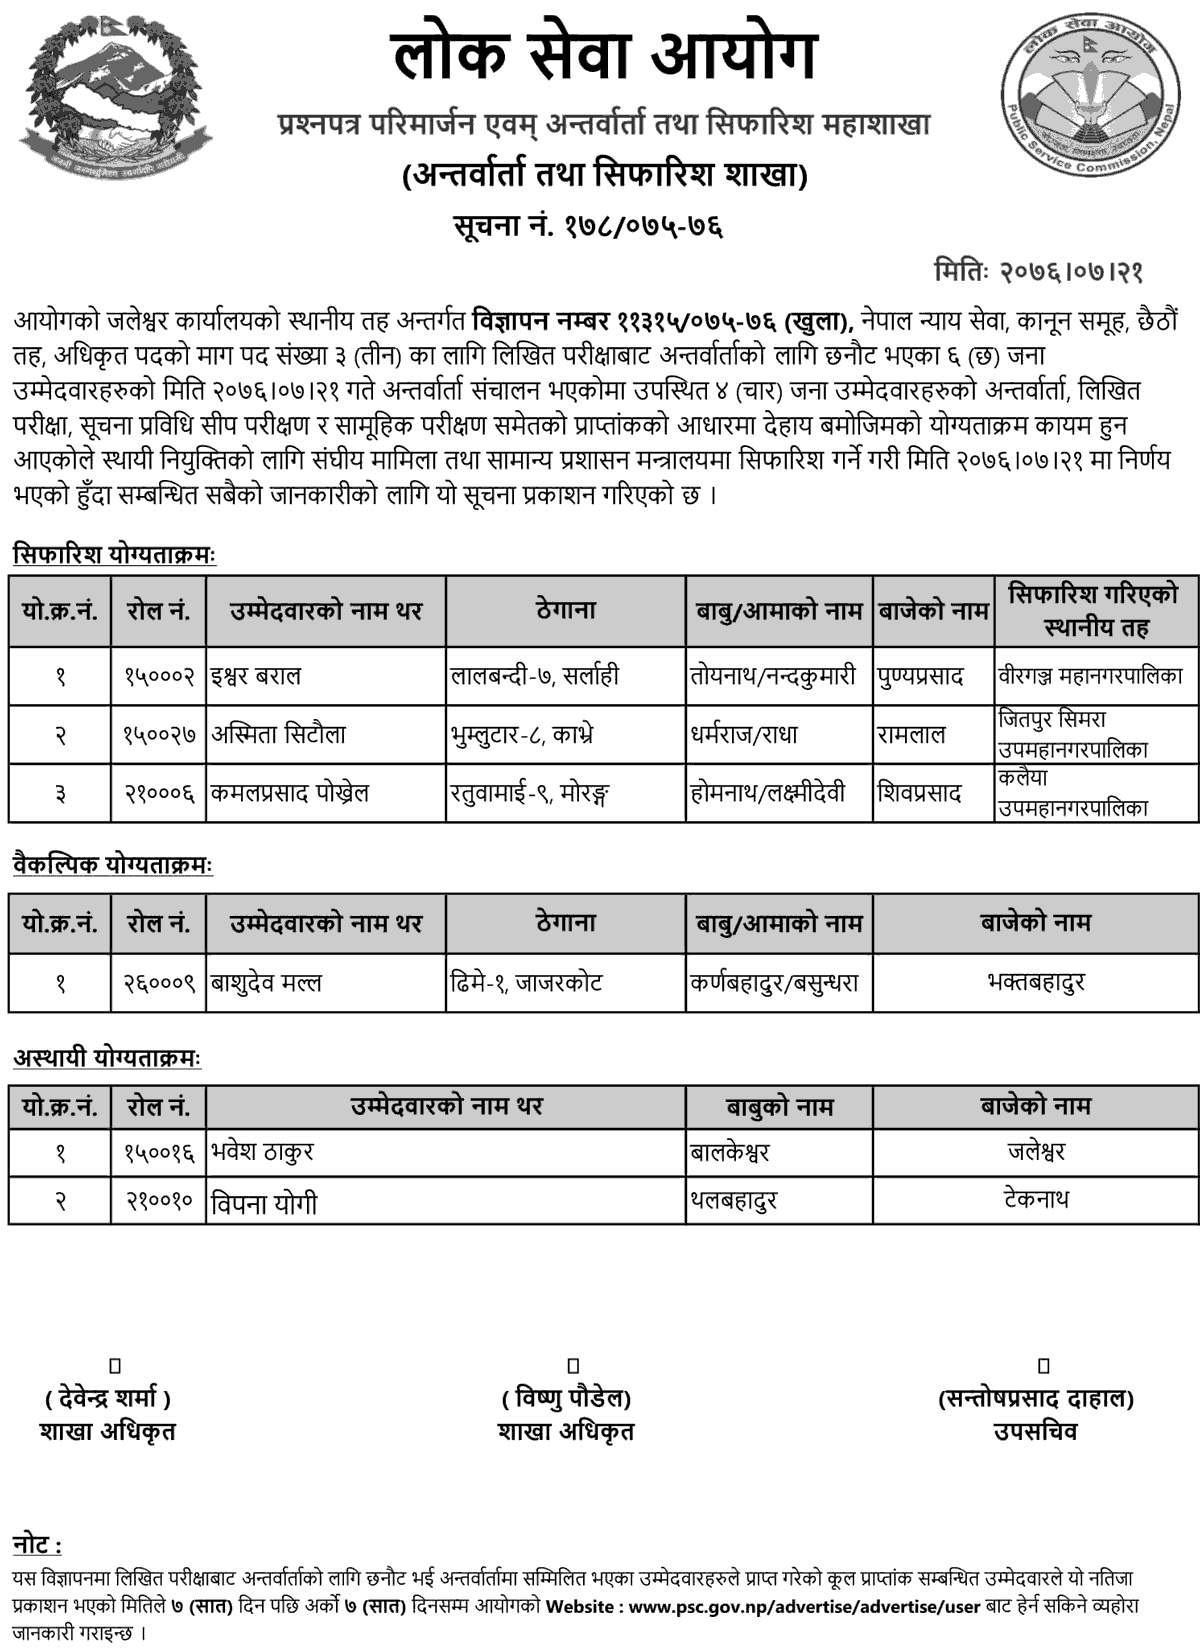 Lok Sewa Aayog Jaleshwor Local Level Officer Final Result and Recommendations